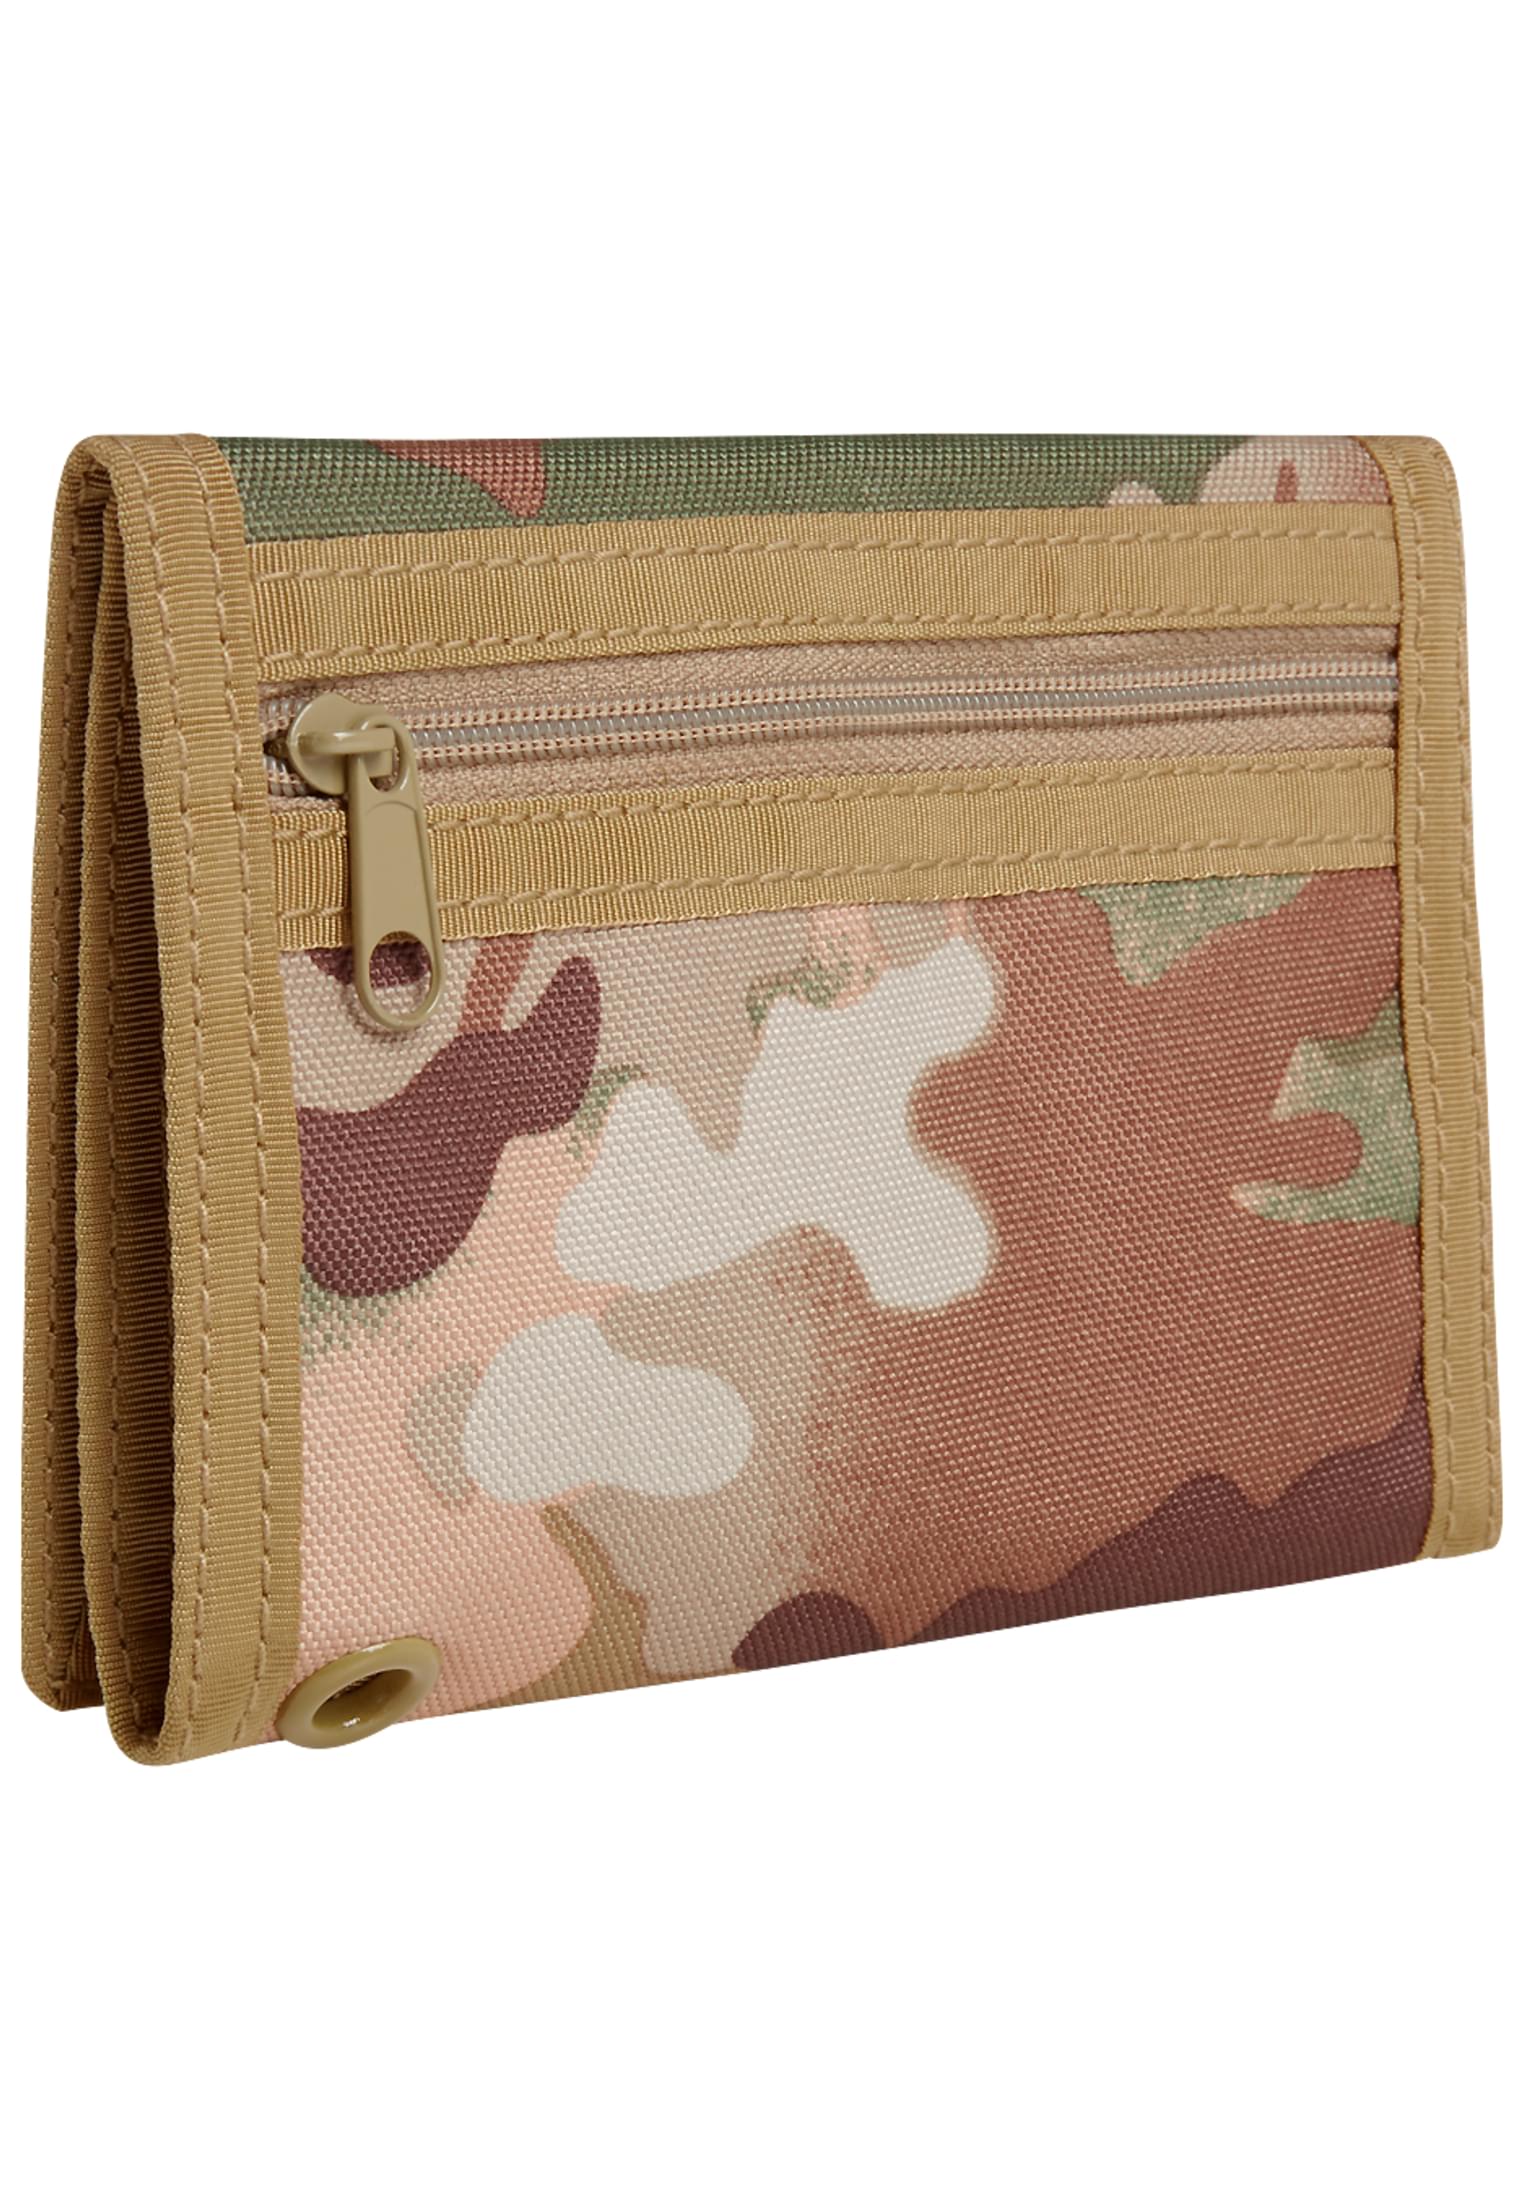 Taschen Wallet Three in Farbe tactical camo